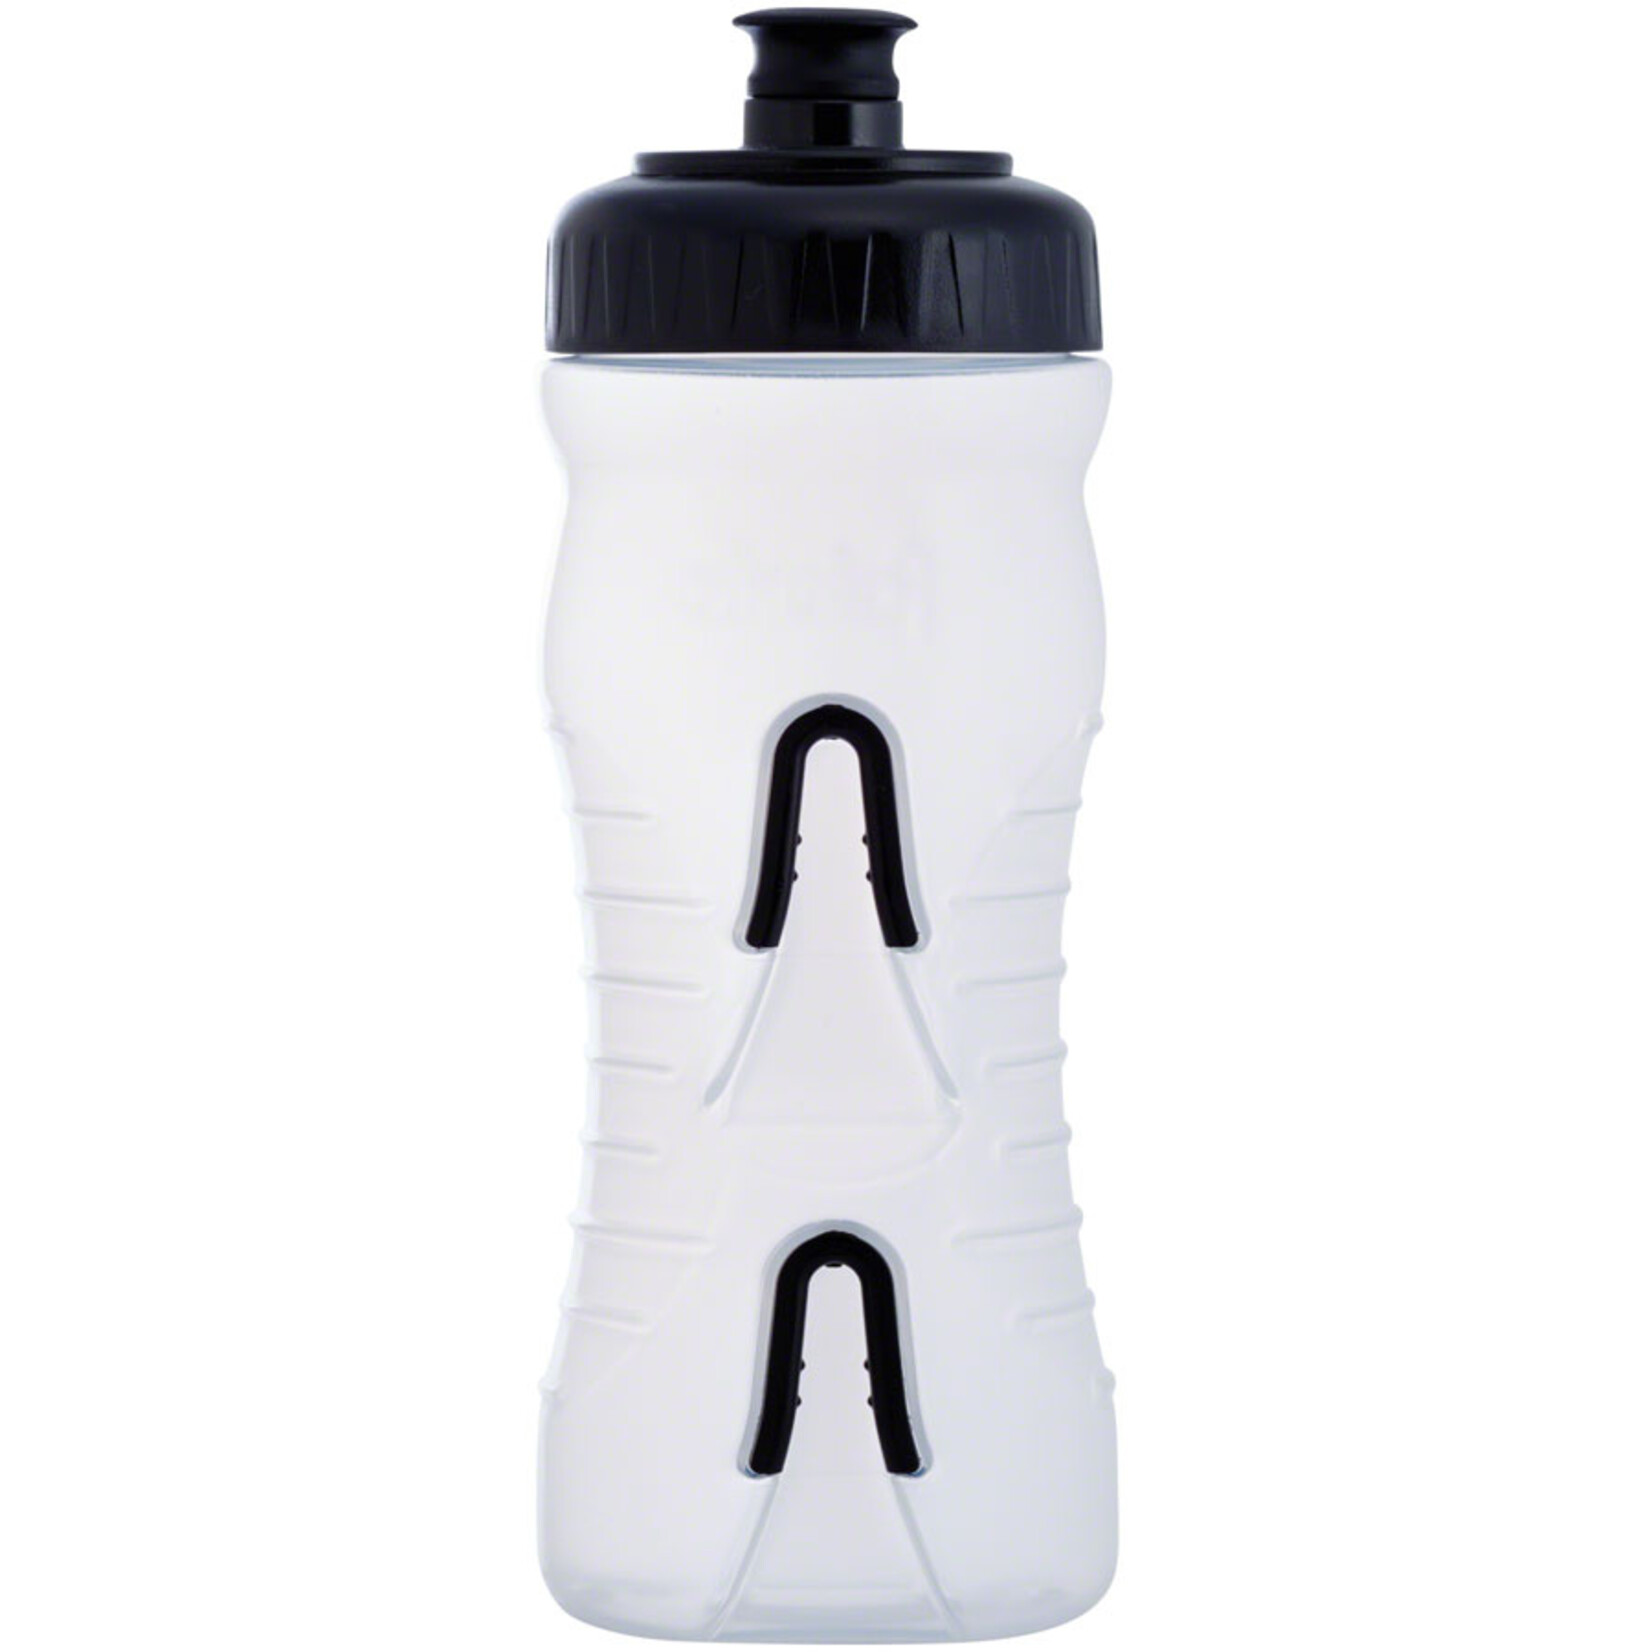 Fabric Fabric Cageless Water Bottle: 600ml, Clear/Black